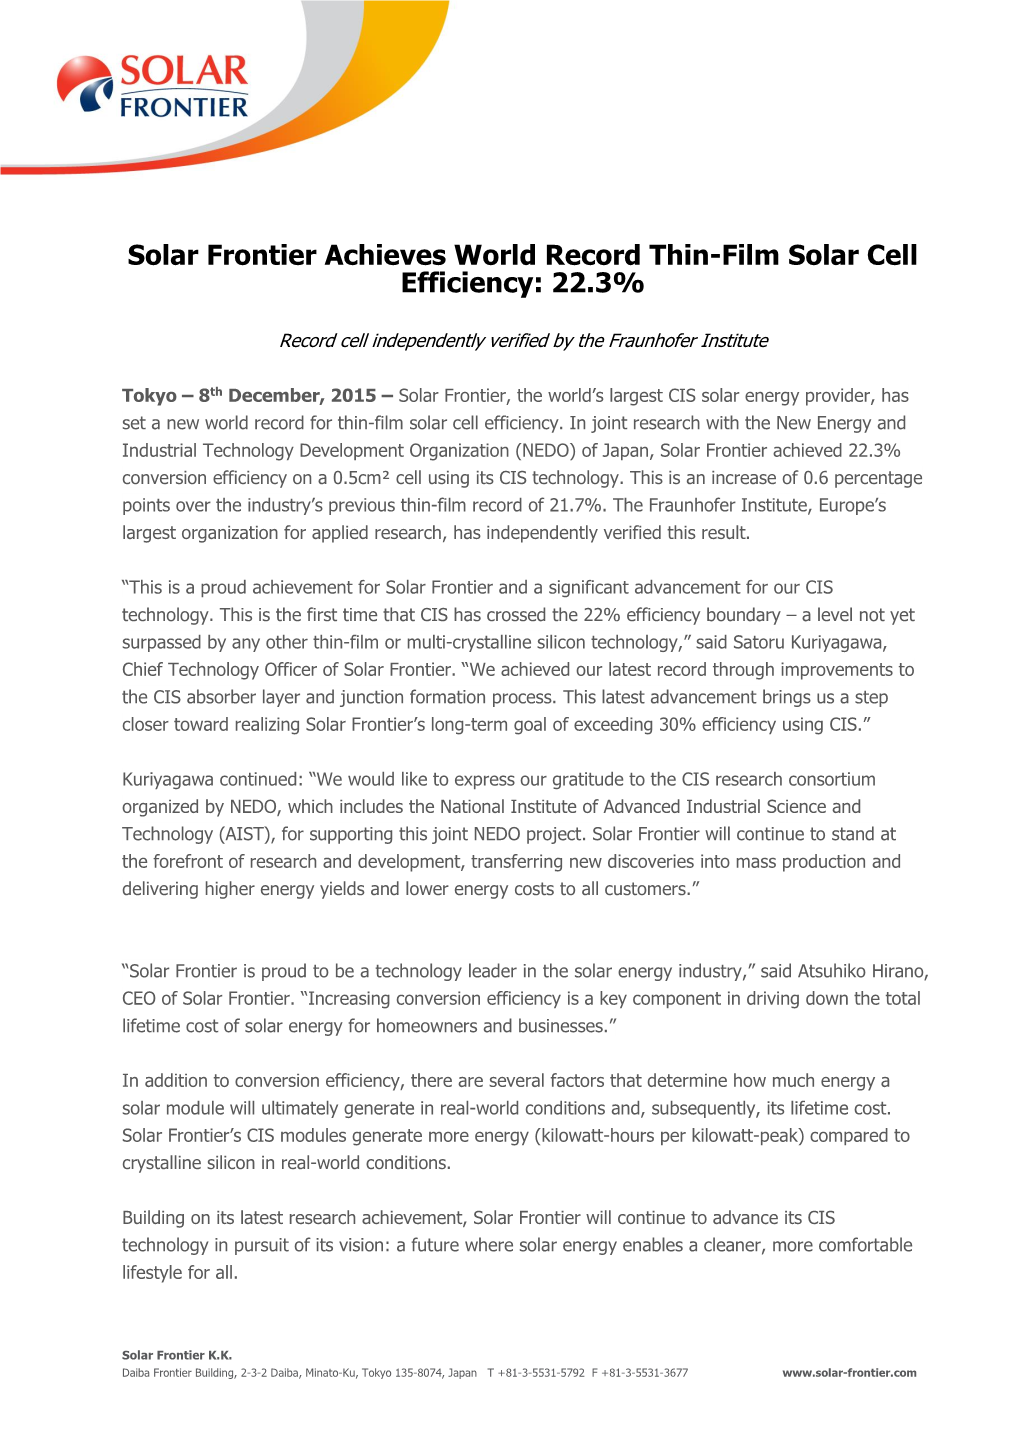 Solar Frontier Achieves World Record Thin-Film Solar Cell Efficiency: 22.3%